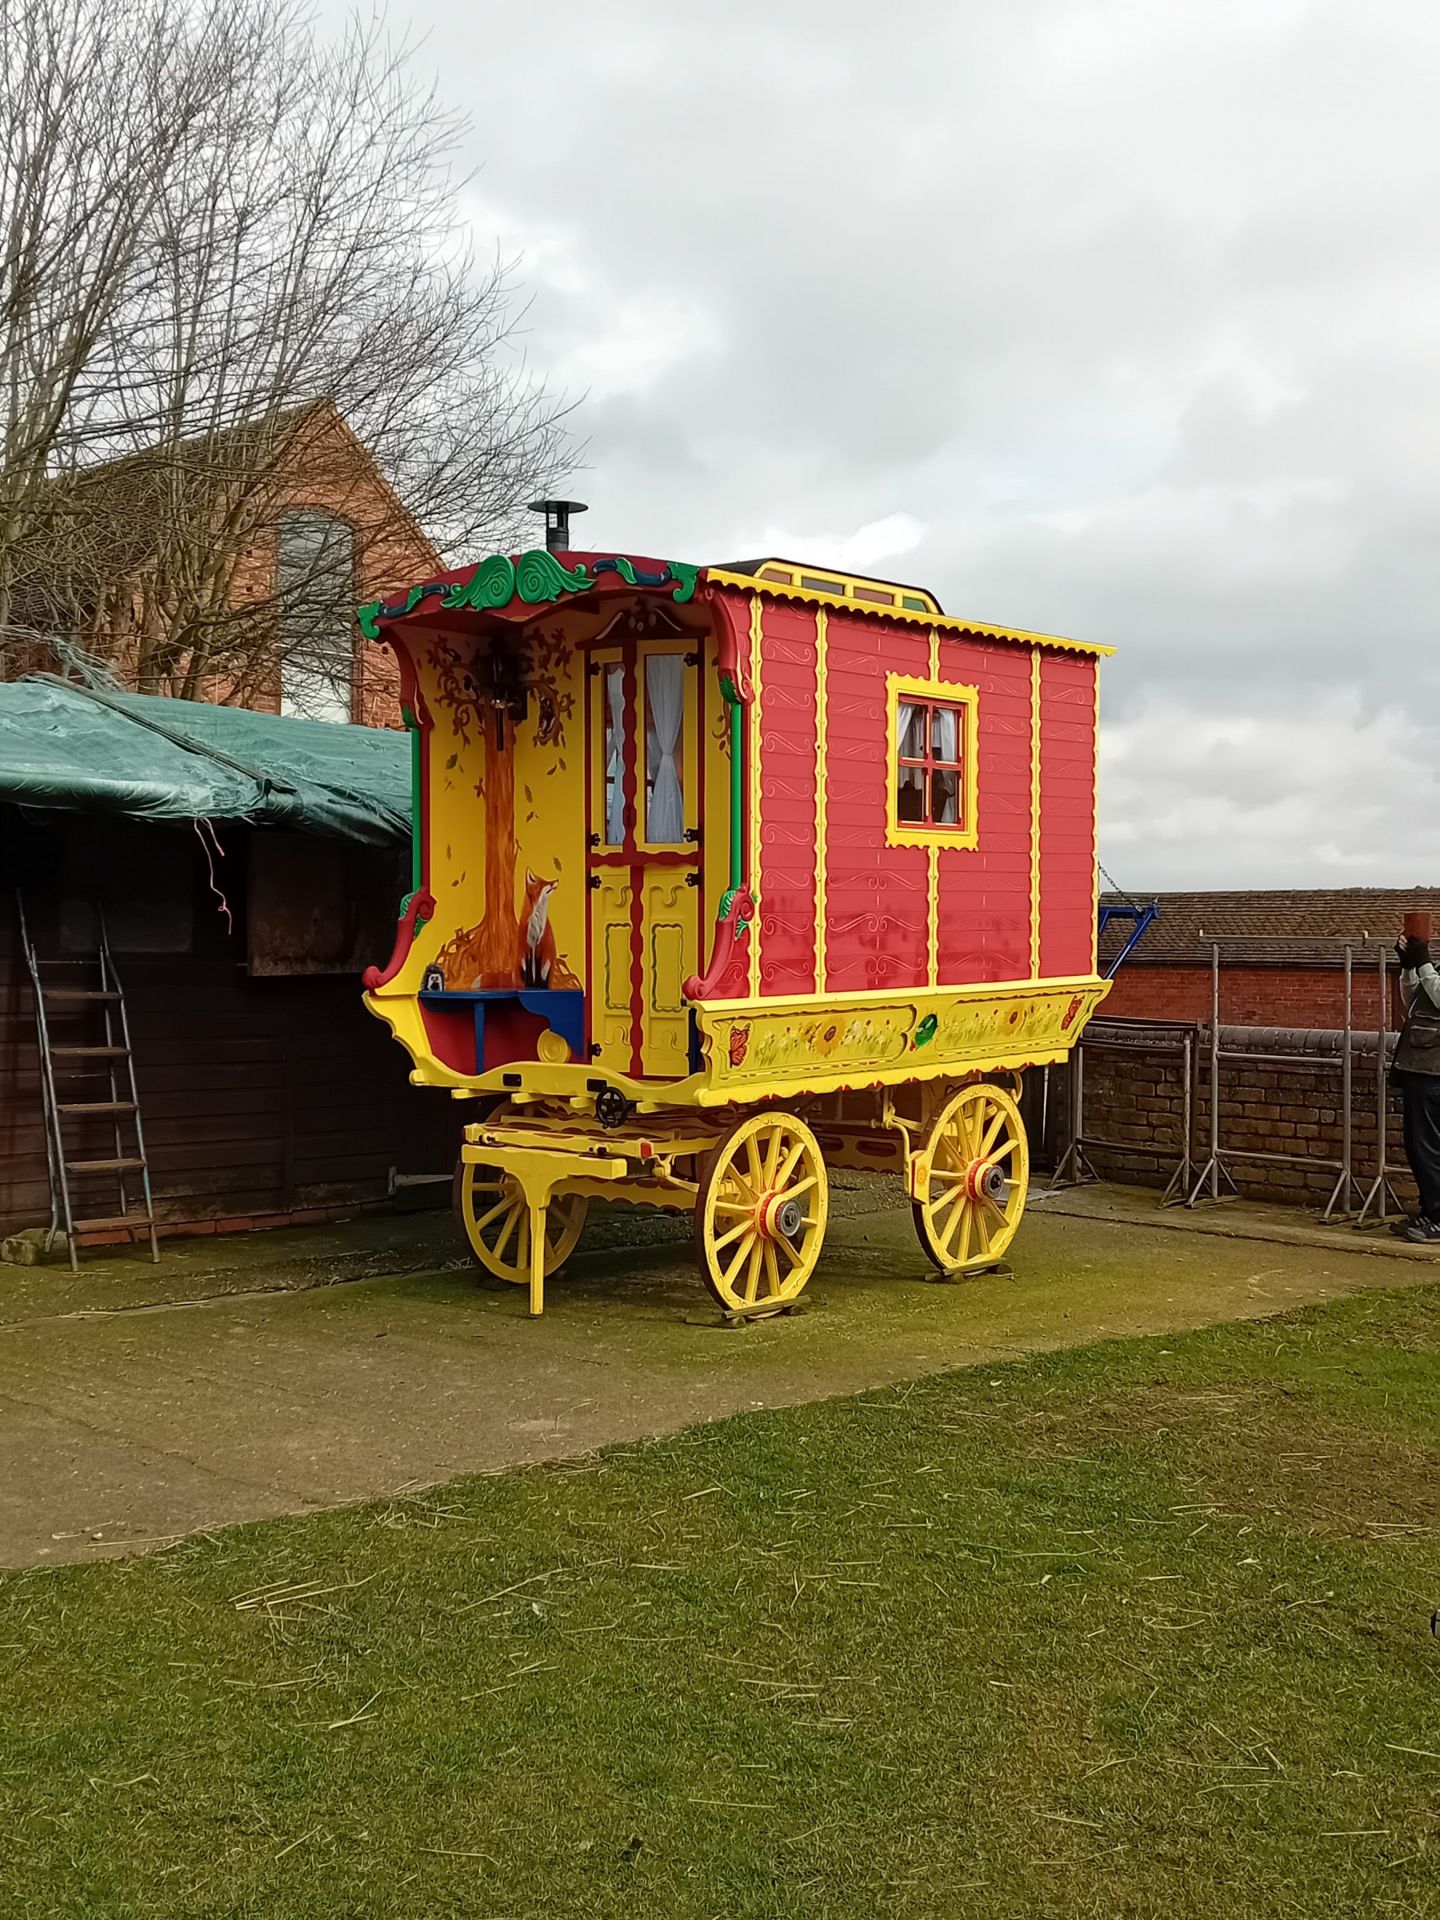 BURTON LIVING WAGON built by H. Charnock & Sons of Halifax in 1912, to suit a 15hh single